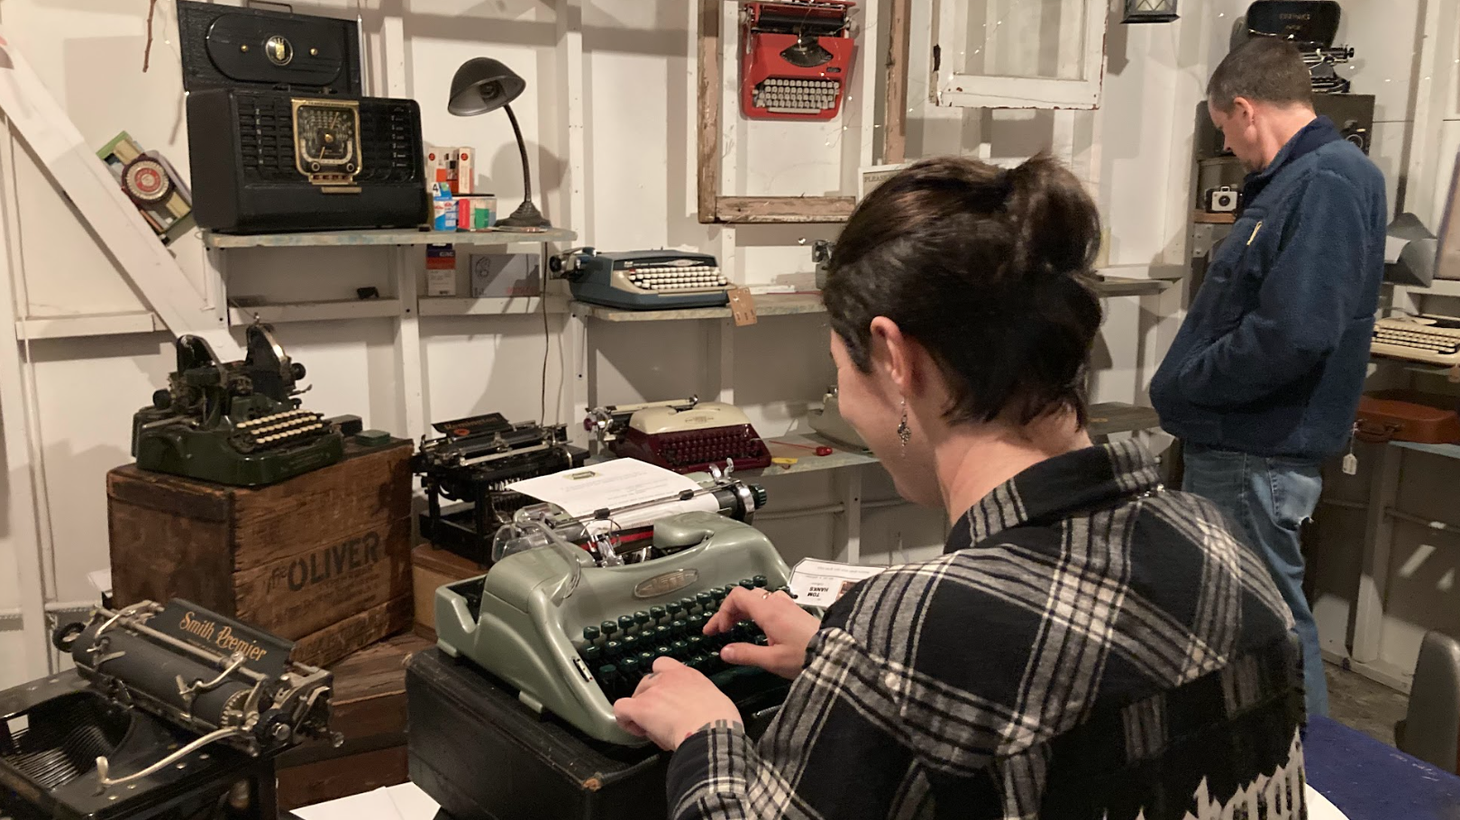 Typewriter Connection rings in at 400 square feet but holds dozens of typewriters.